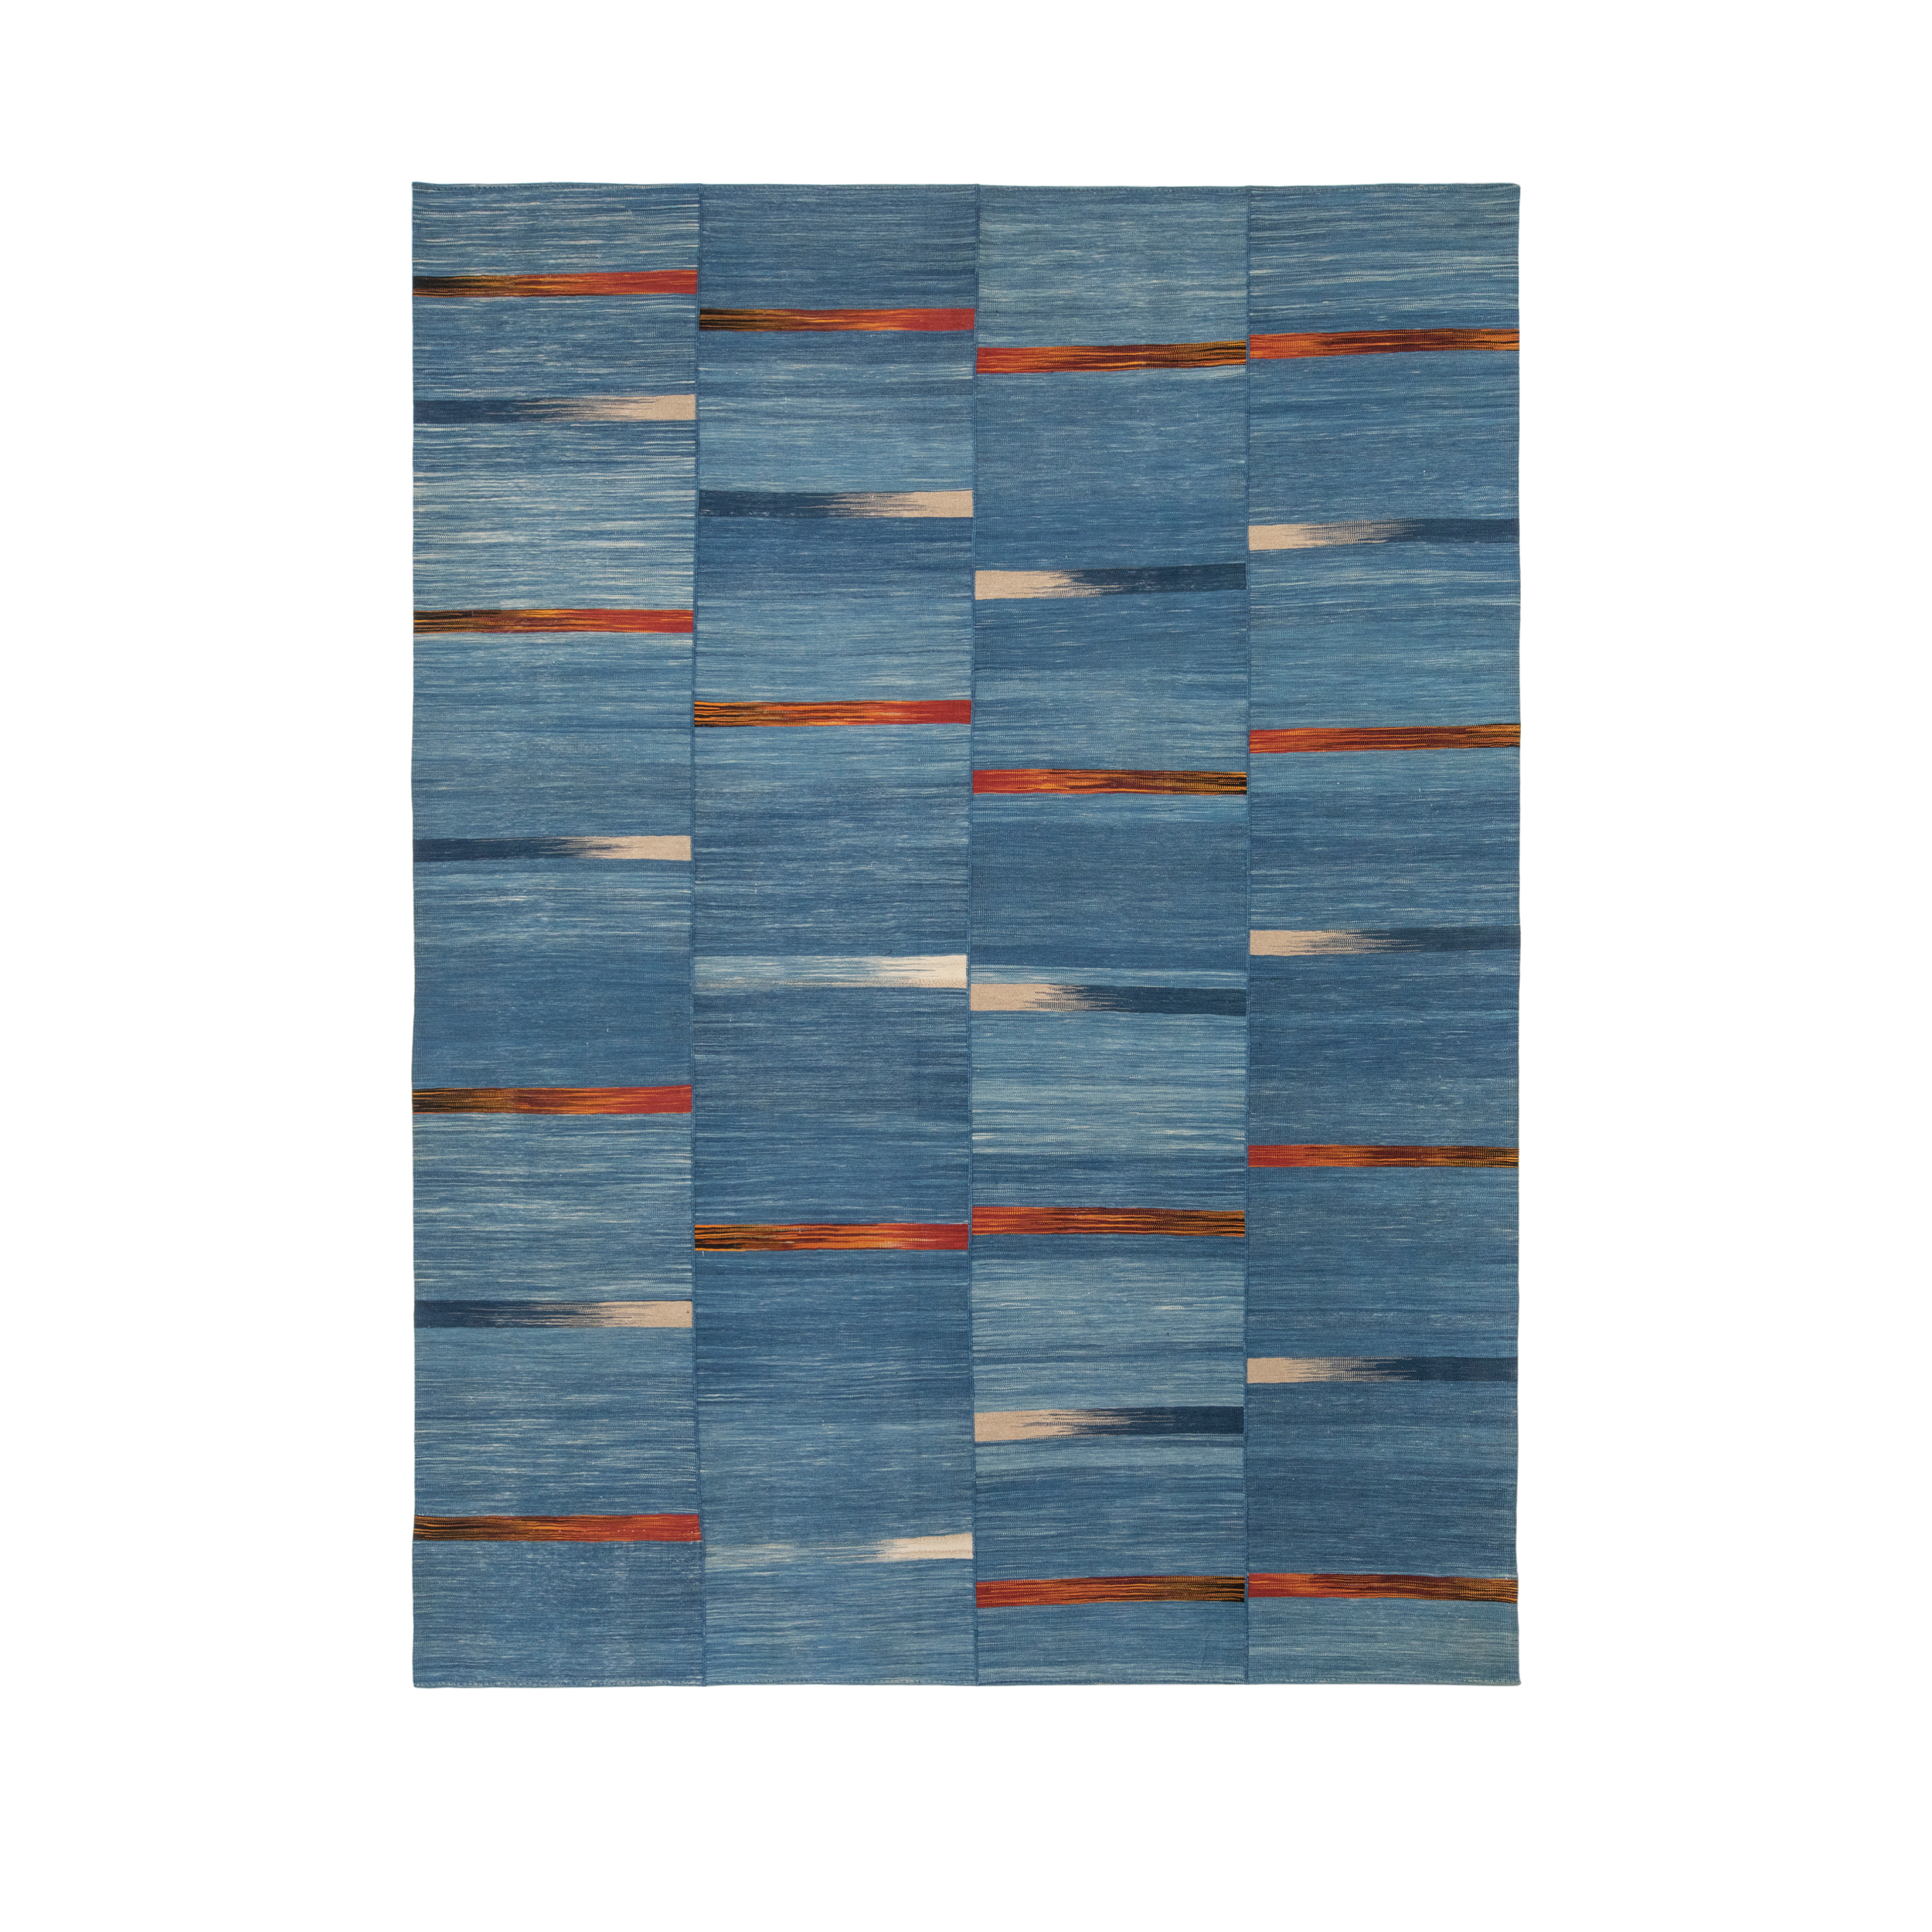 This Mazandaran rug is hand-woven and made of 100% wool.